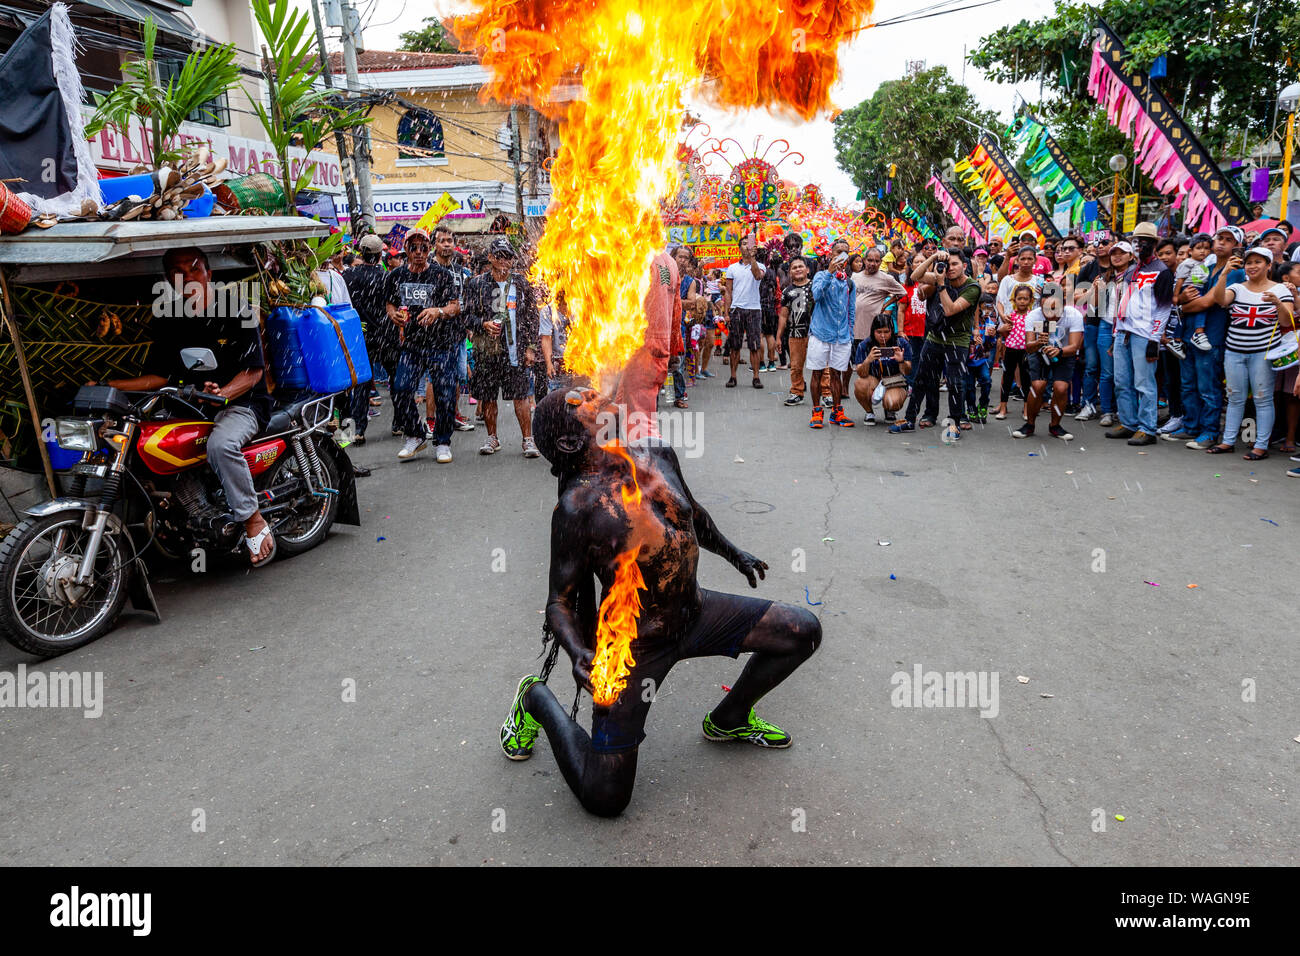 A Fire Breather Performs In The Street During The Ati-Atihan Festival, Kalibo, Panay Island, Aklan Province, The Philippines. Stock Photo